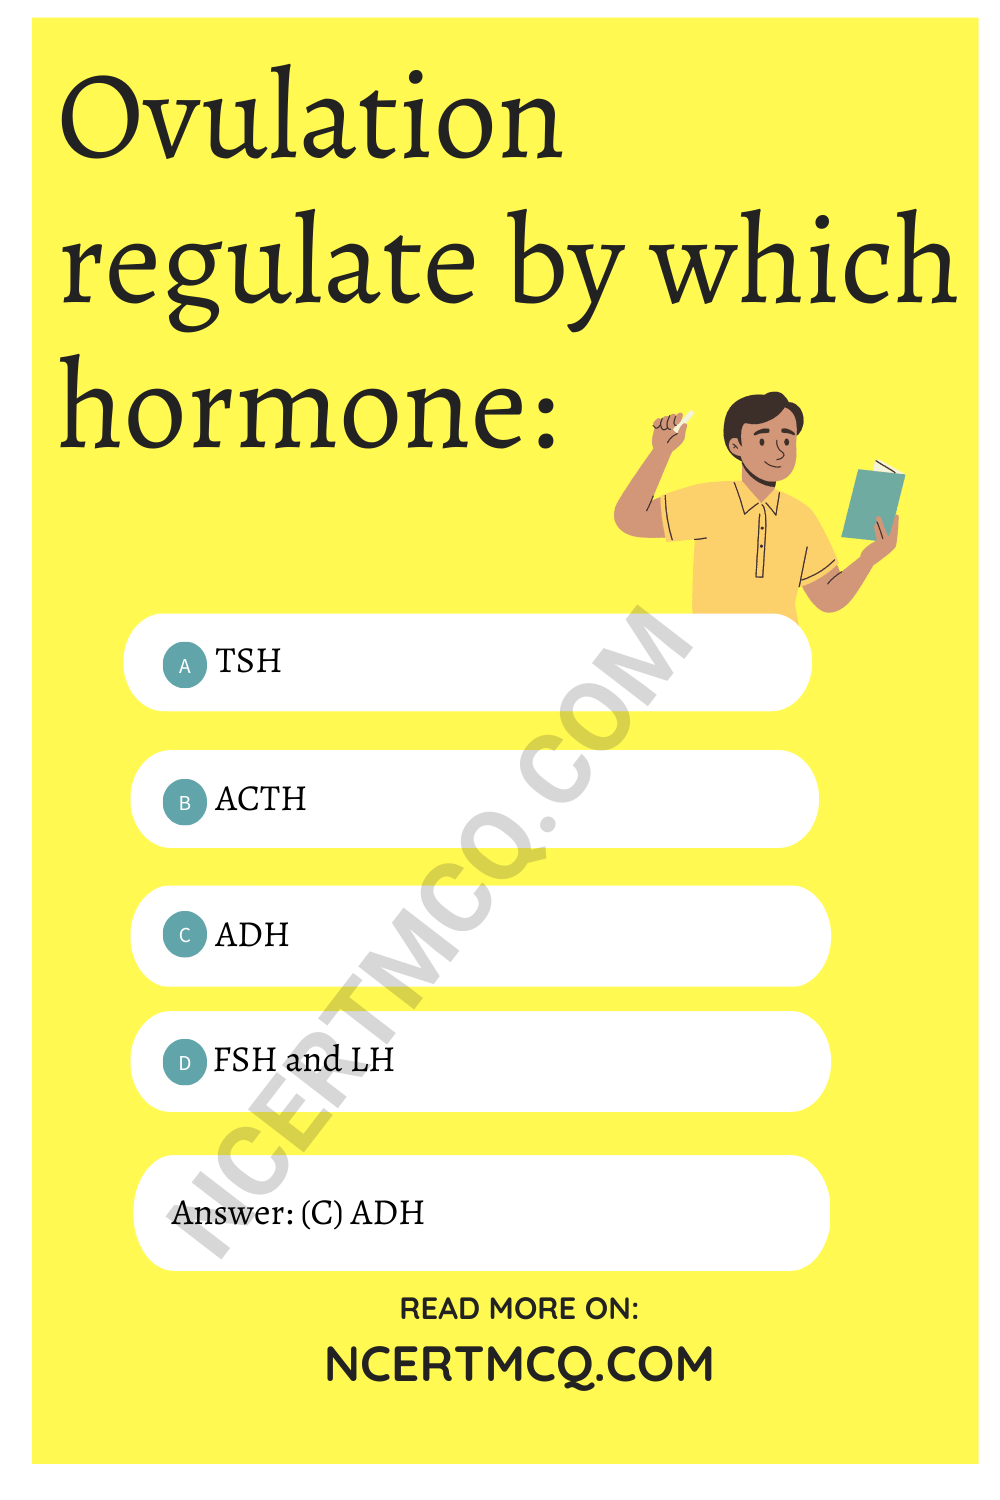 Ovulation regulate by which hormone: